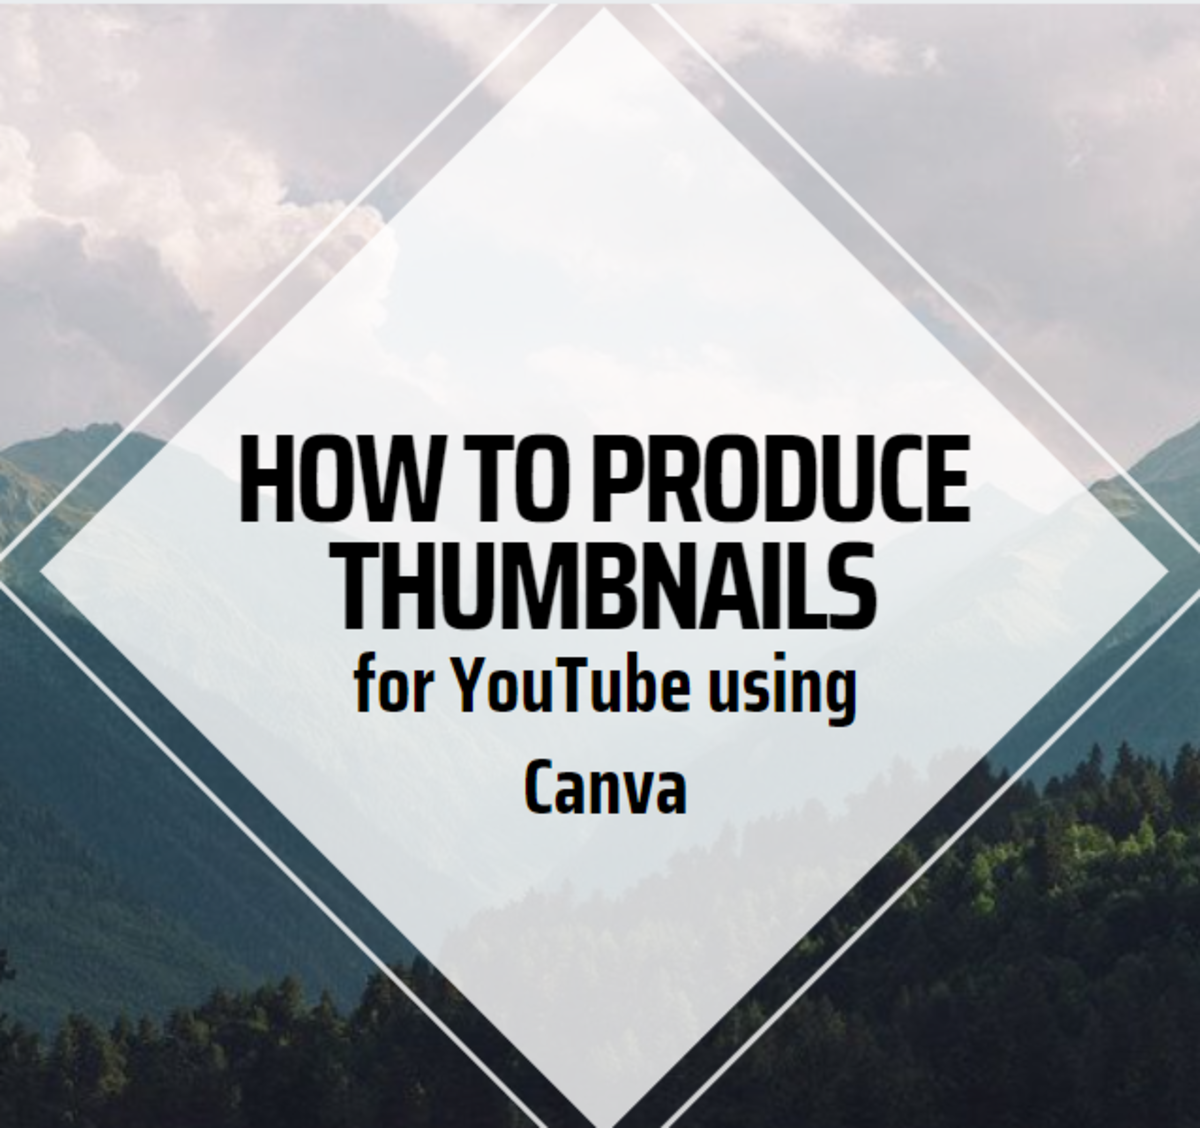 How to Produce Thumbnails for YouTube Using Canva